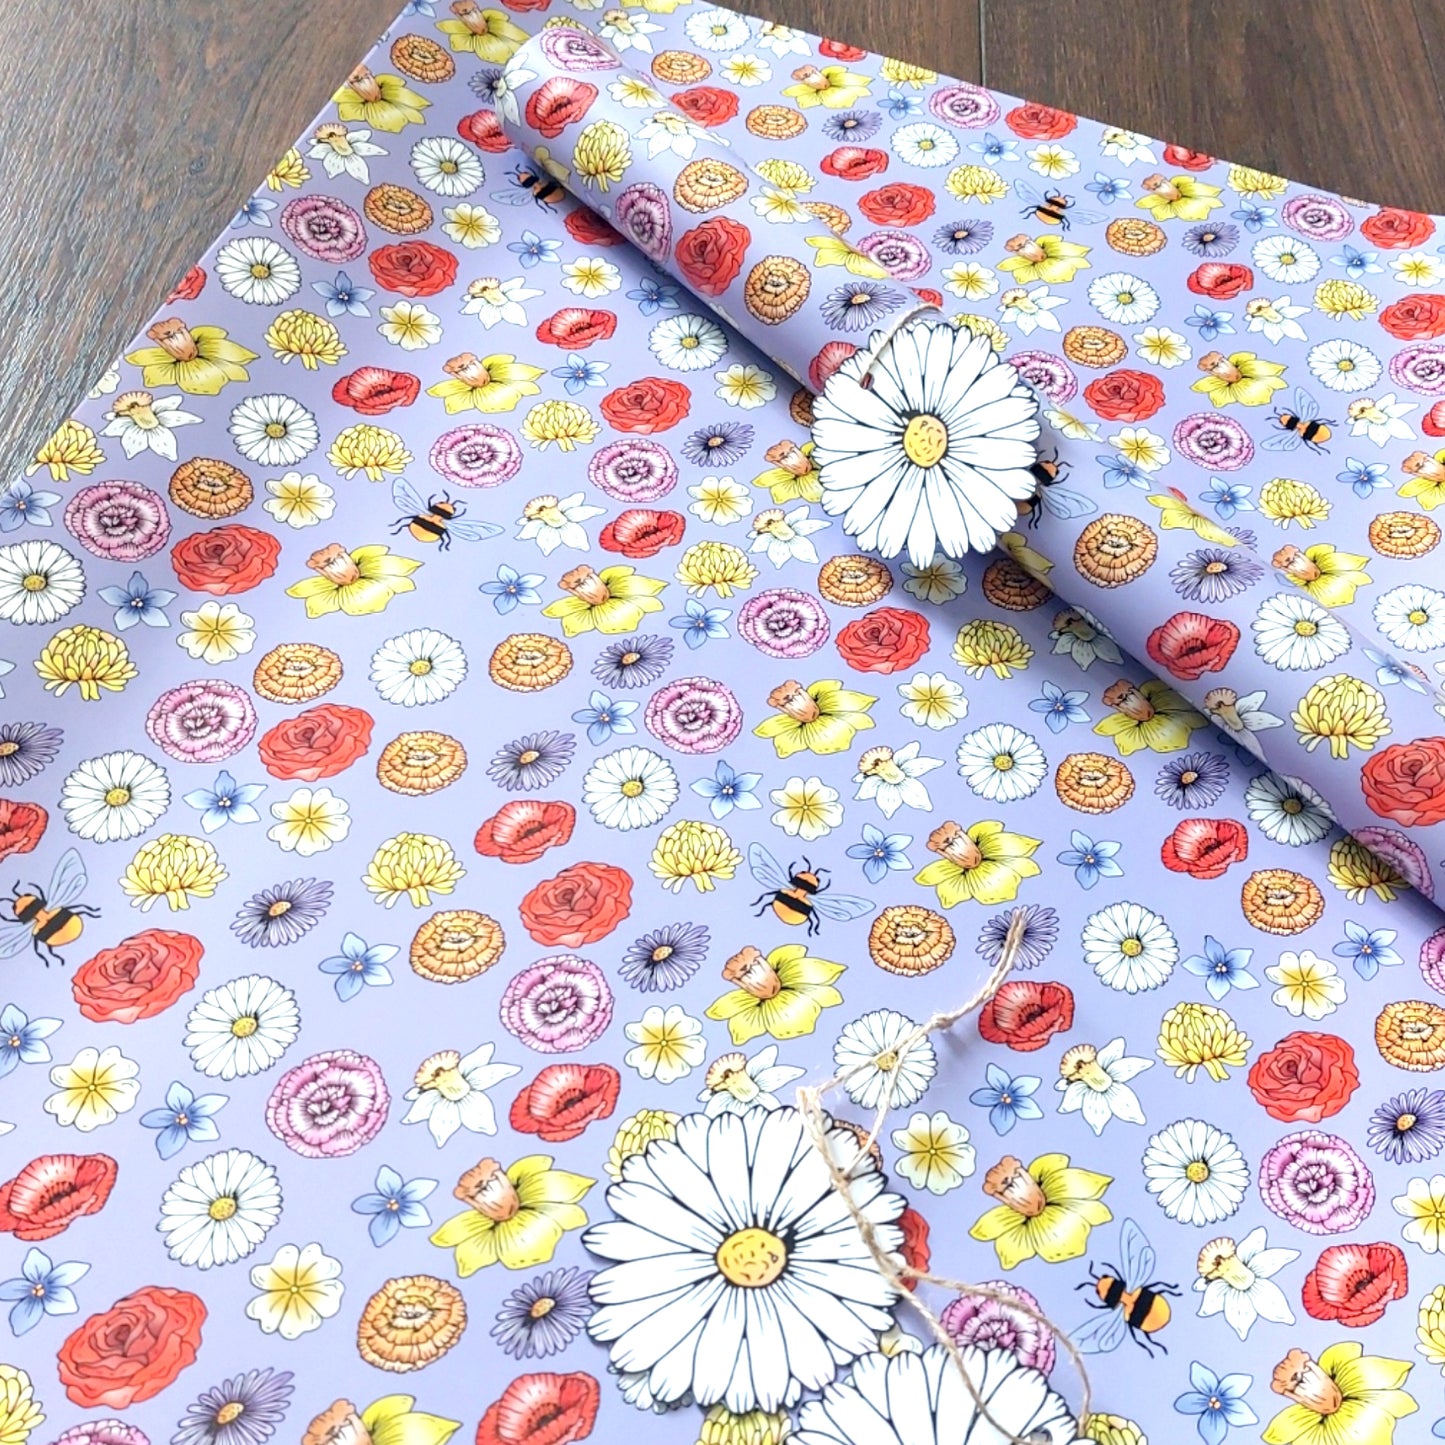 Flowers and Bees Gift Wrap and Tags (Wrapping Paper)